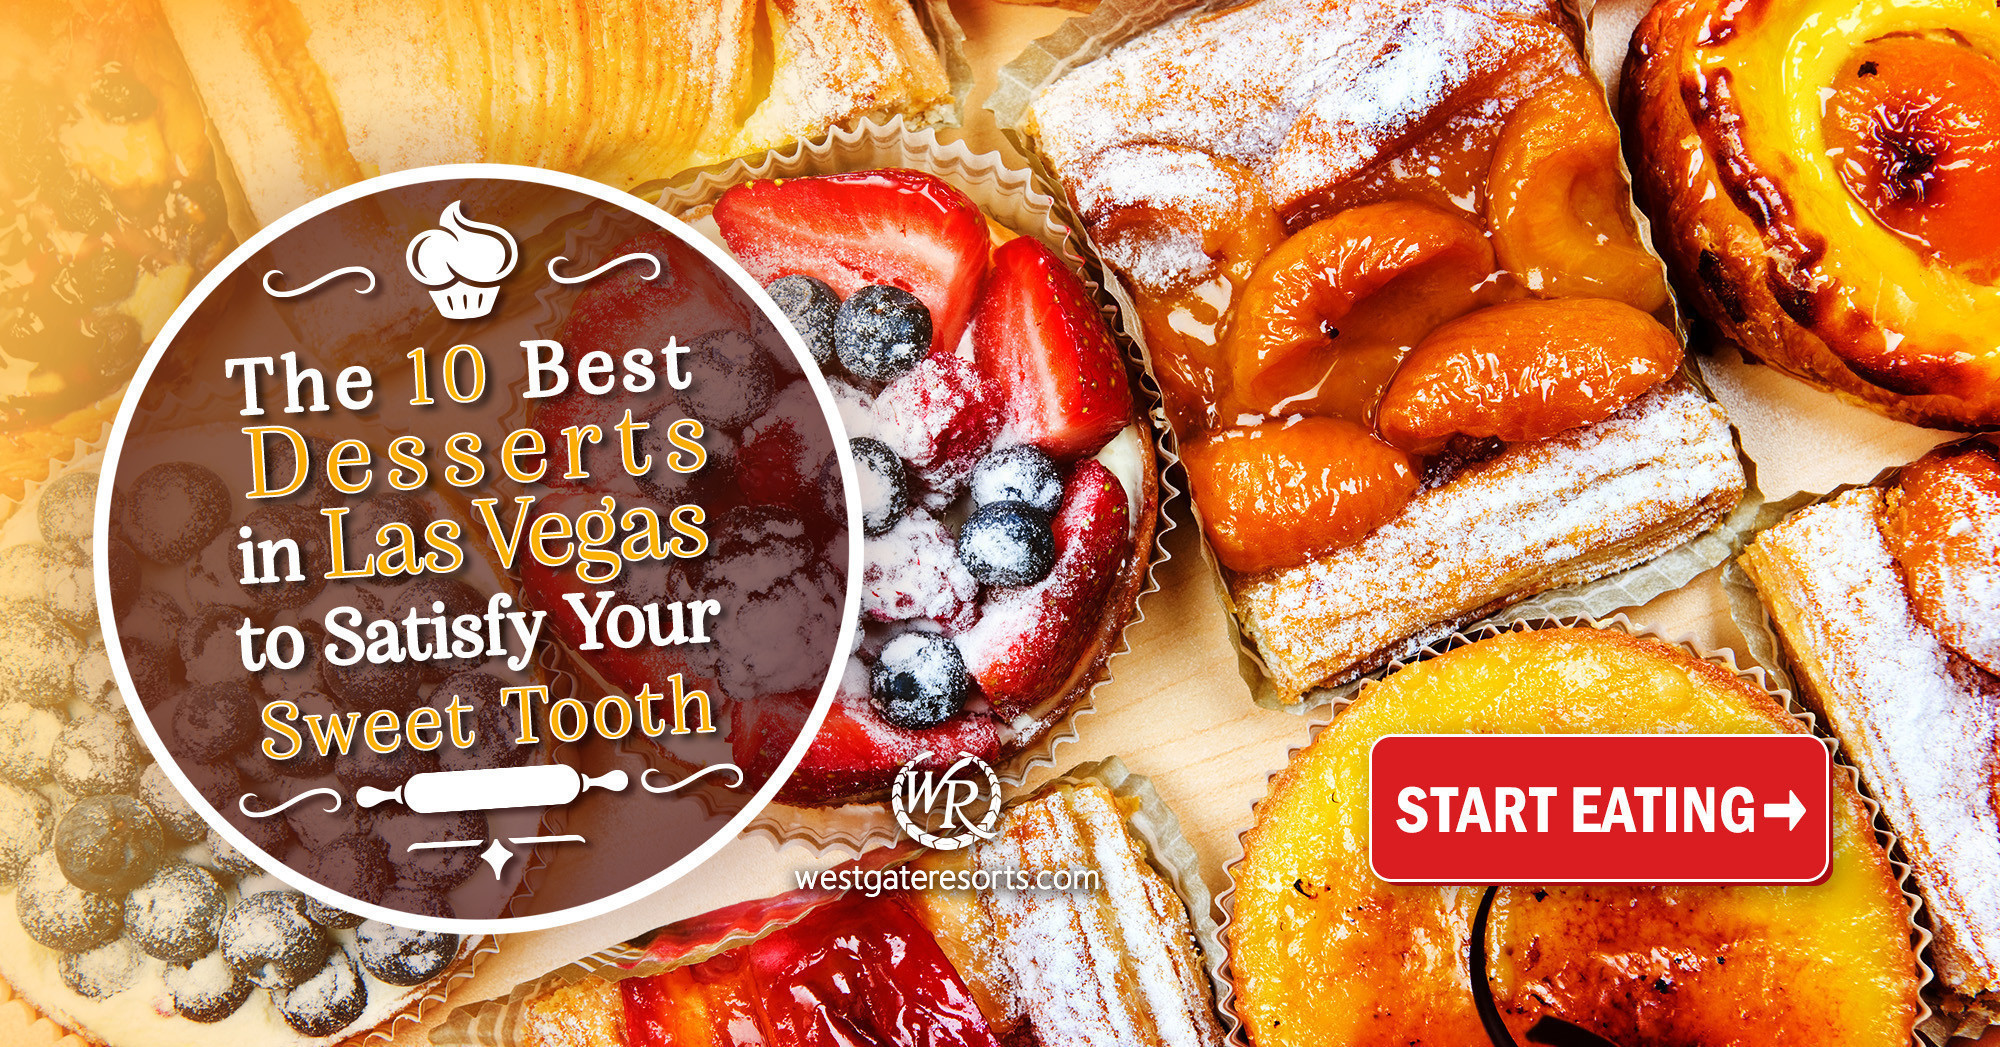 The 10 Best Desserts in Las Vegas to Satisfy Your Sweet Tooth 